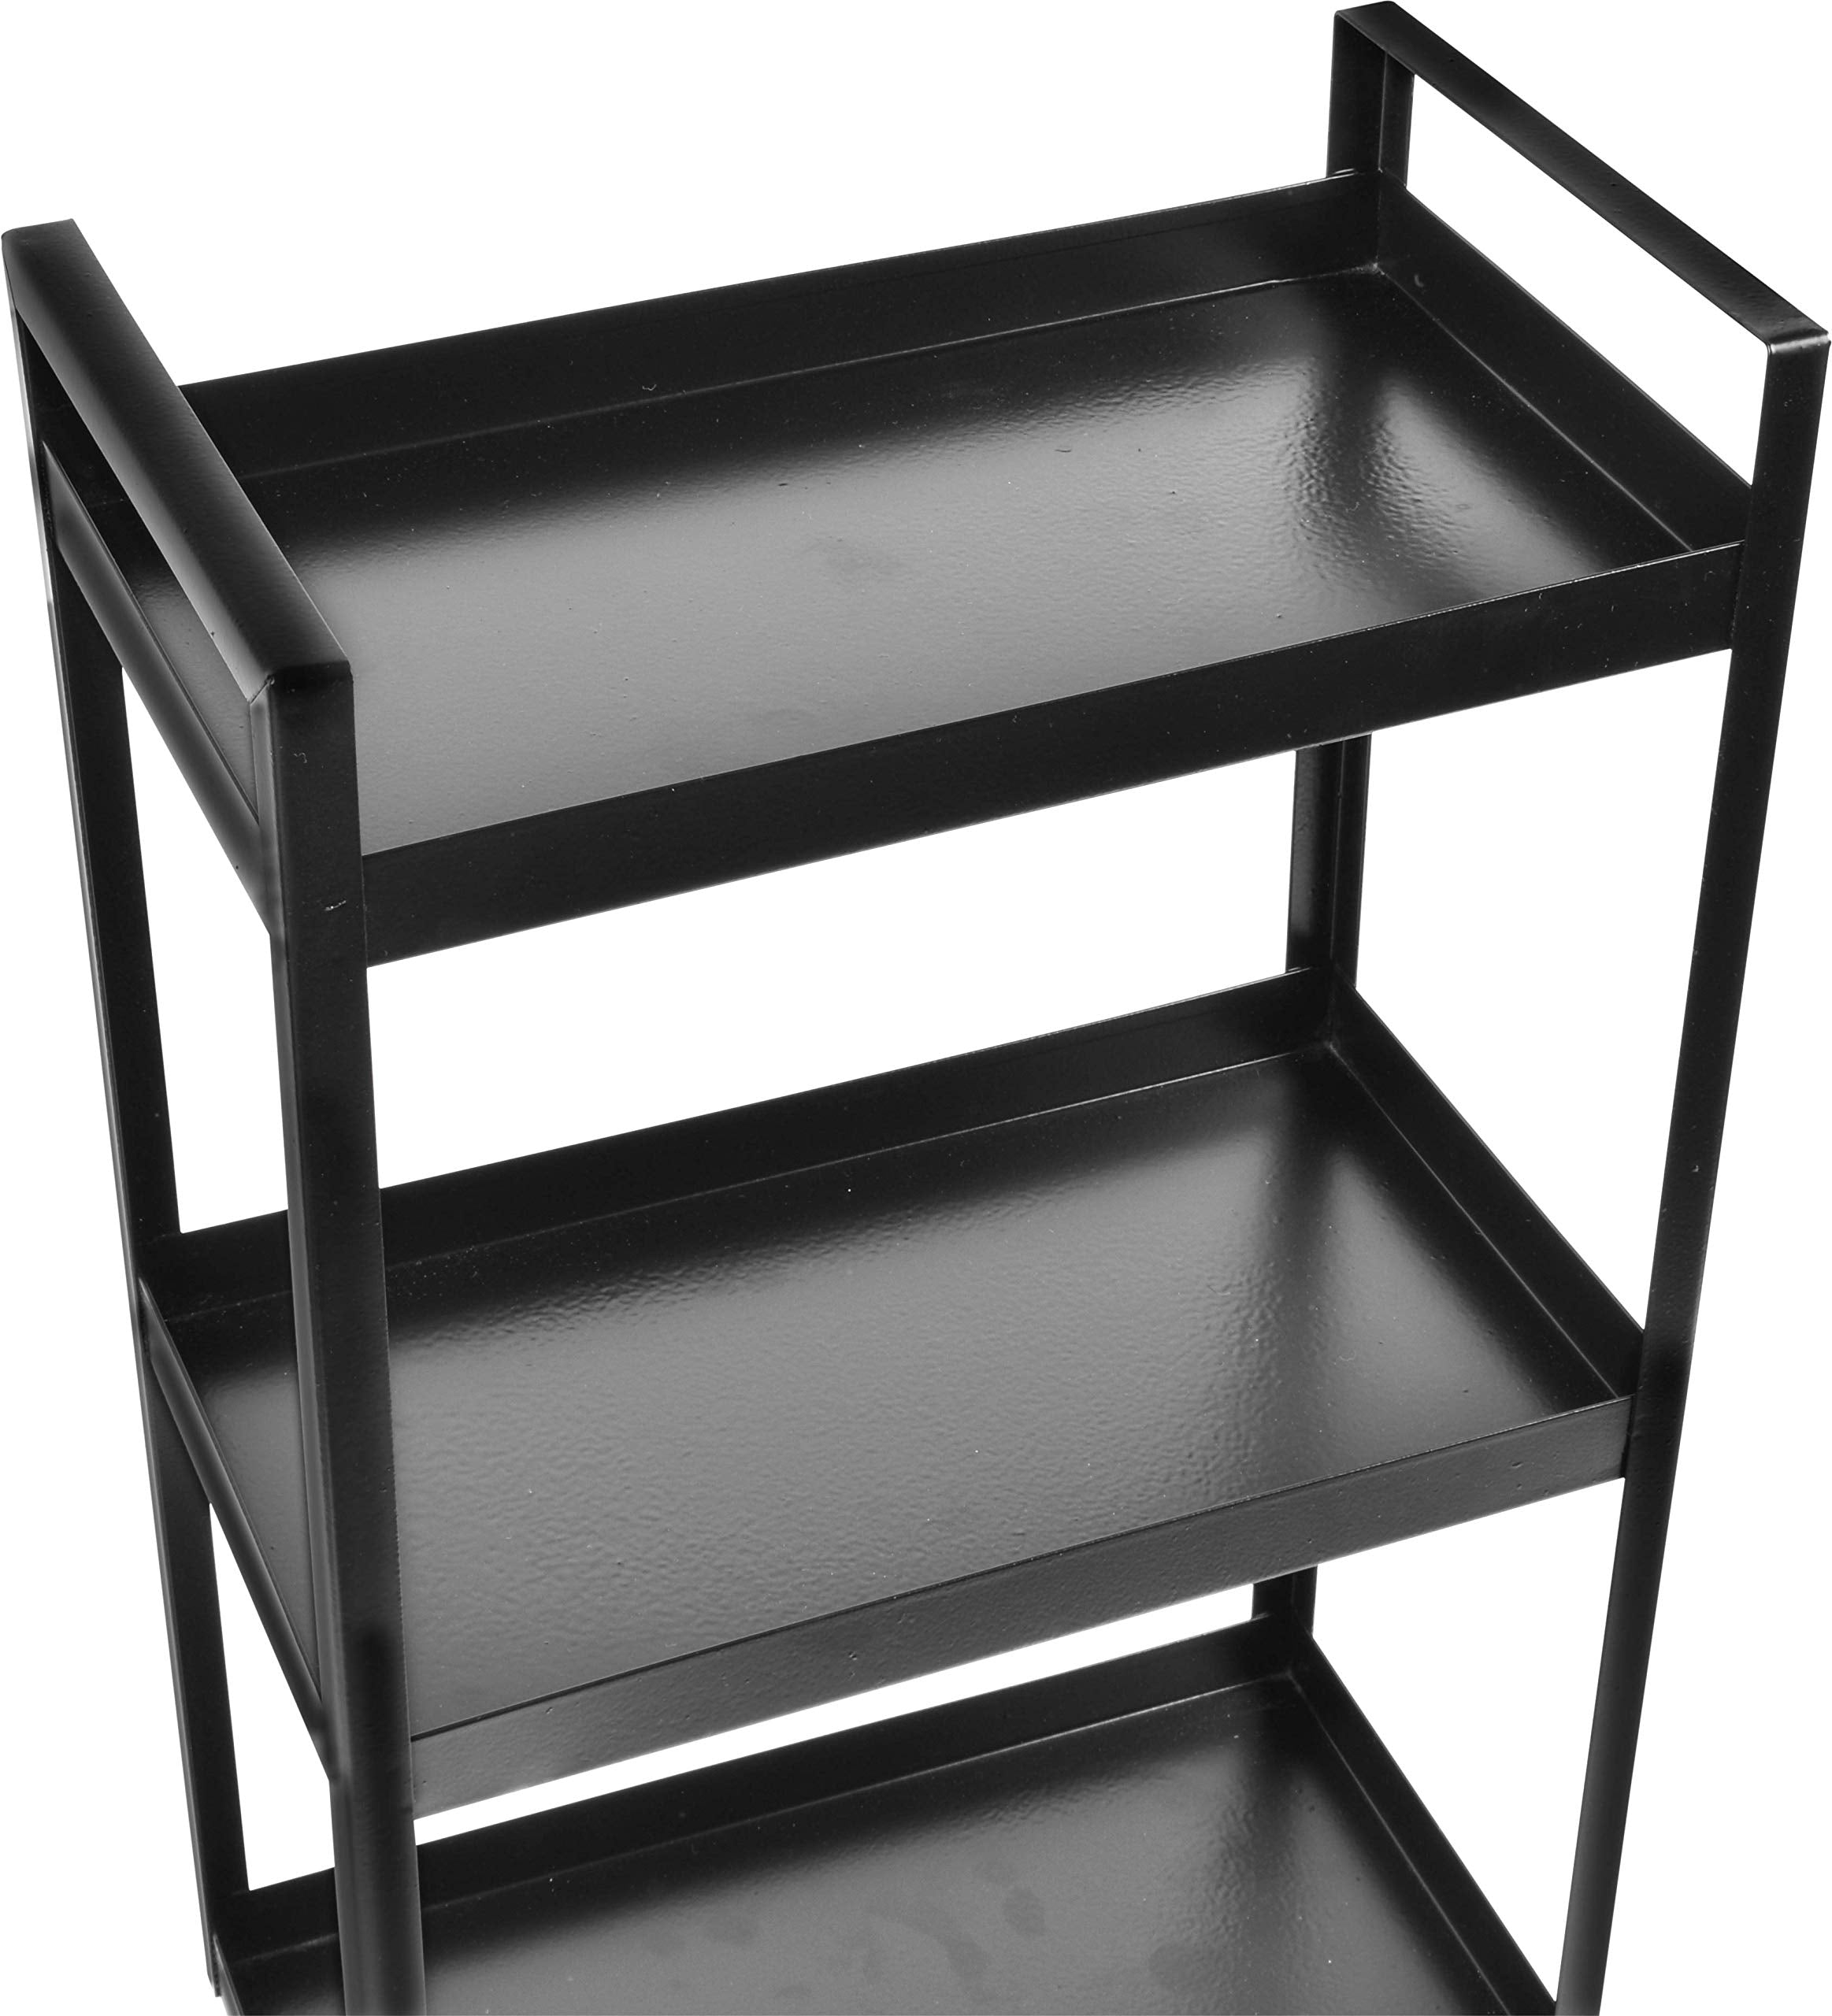 Plantex Deluxe Metal 3 Tier Shelf for Bathroom Kitchen Storage Organizer Home and Office Accessories (Black, Powder Coated Finish)